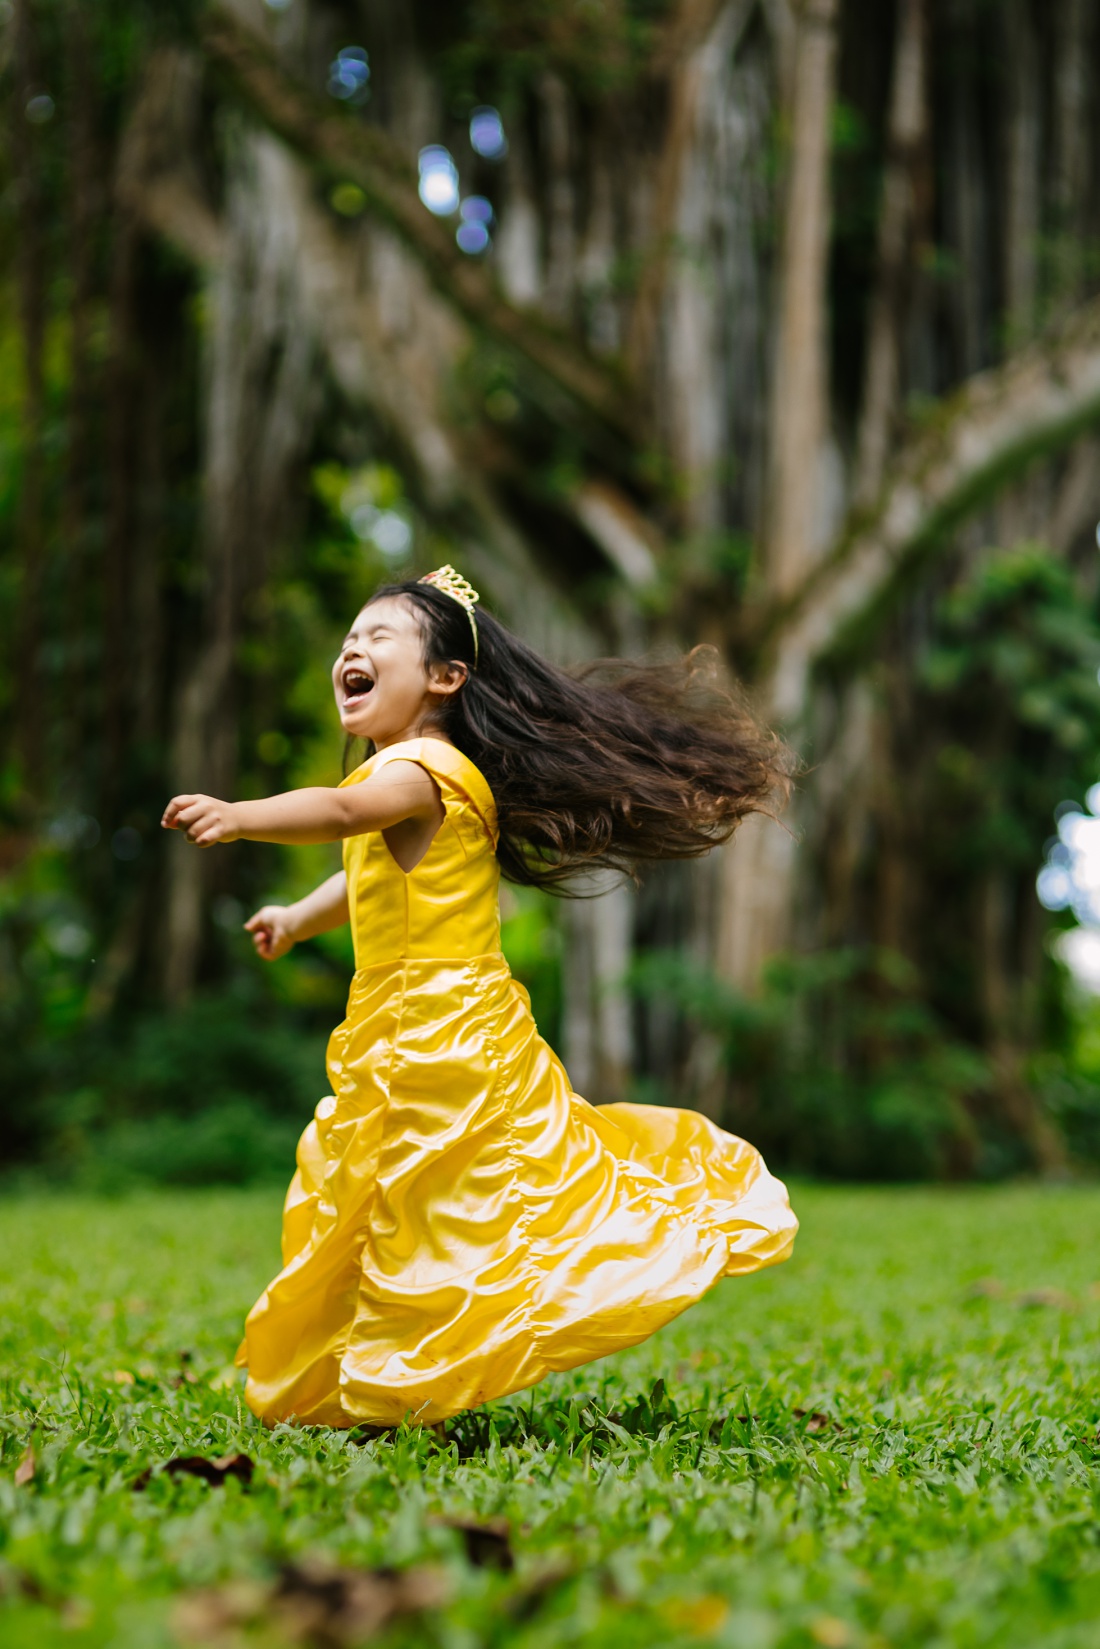 happy girl spinning in nuuanu park wearing a belle dress